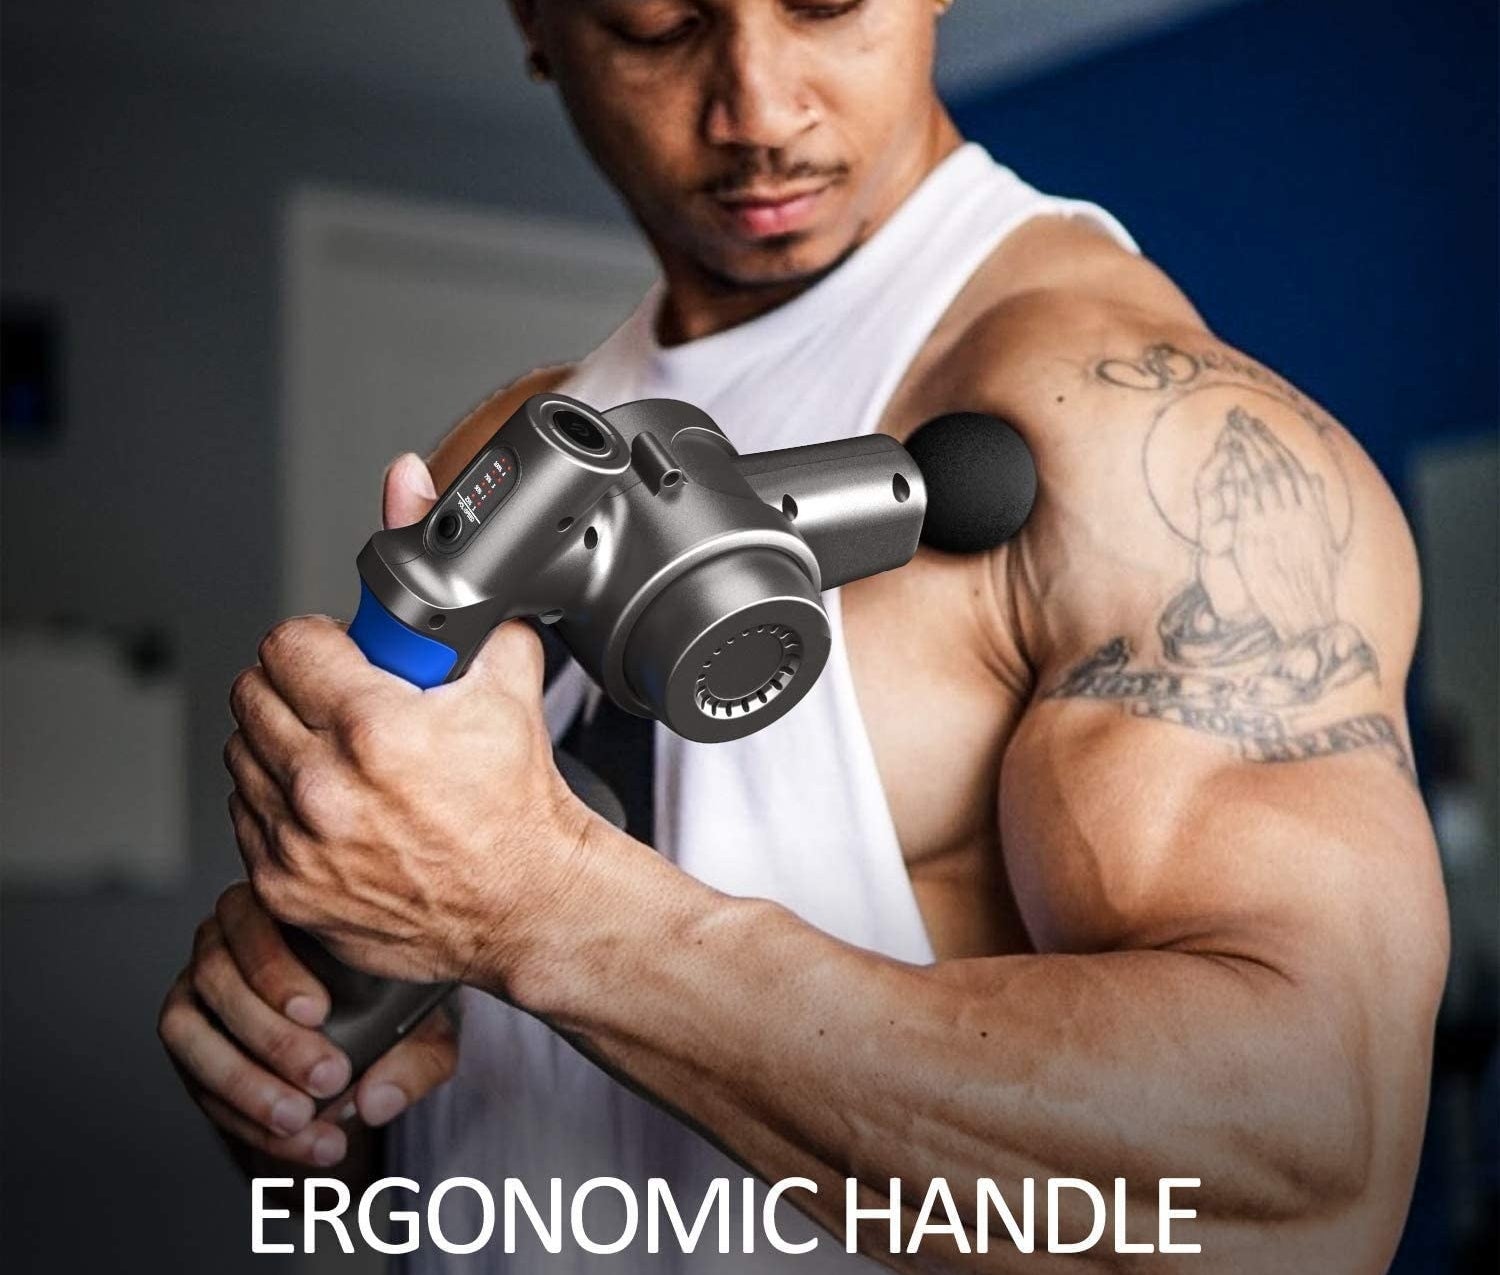 person using the massage gun on their arm